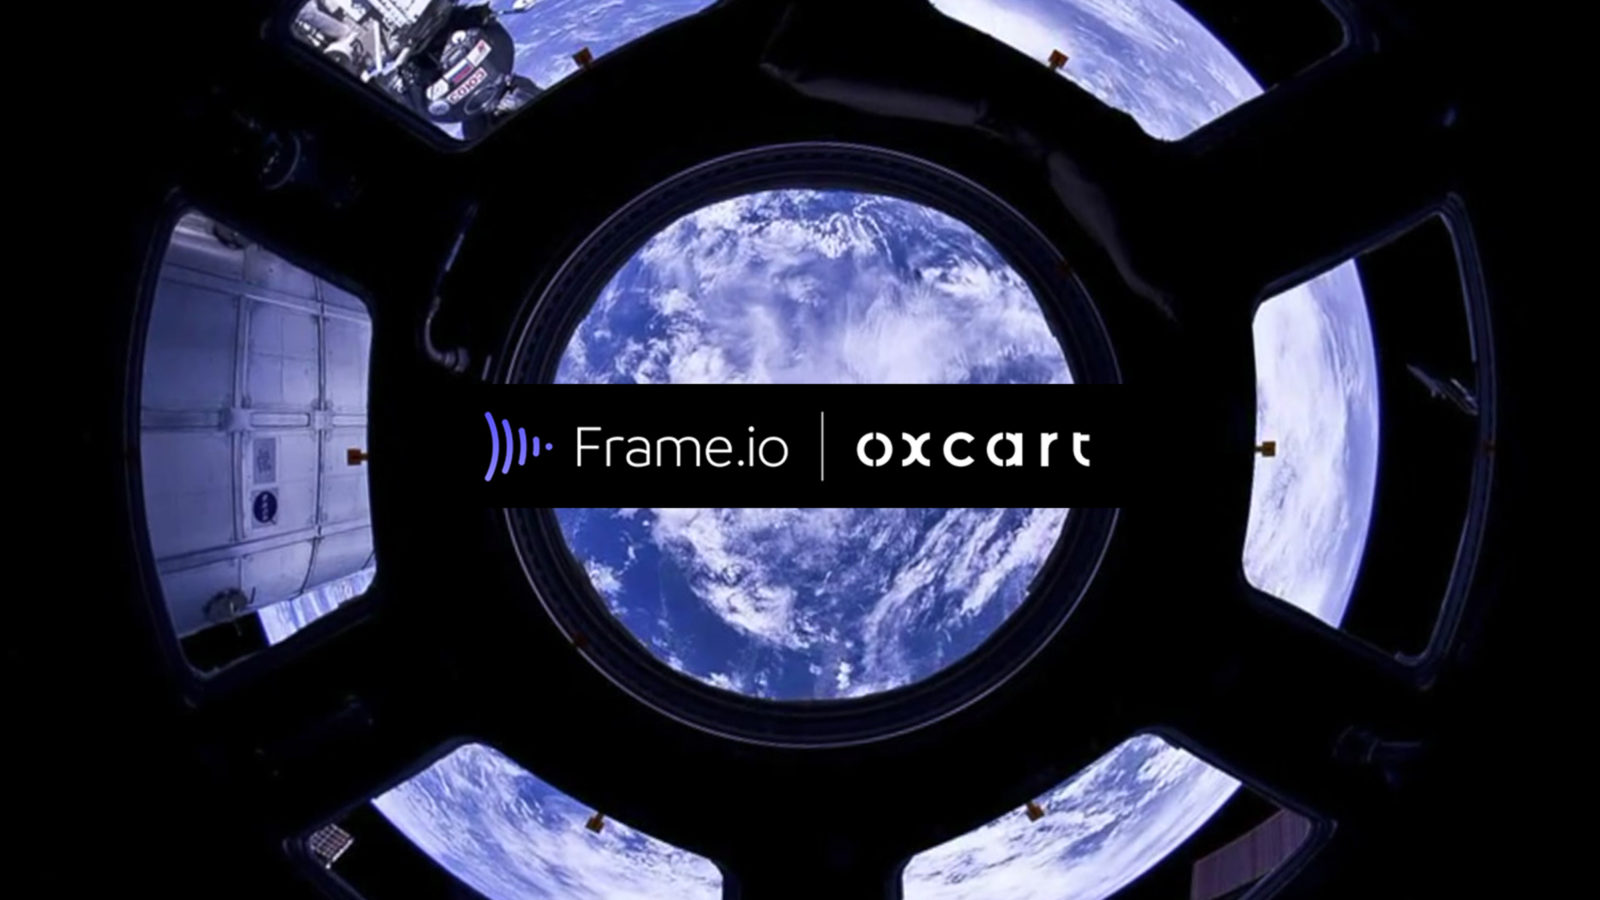 Frame.io and Oxcart NASA | SpaceX launch collaboration